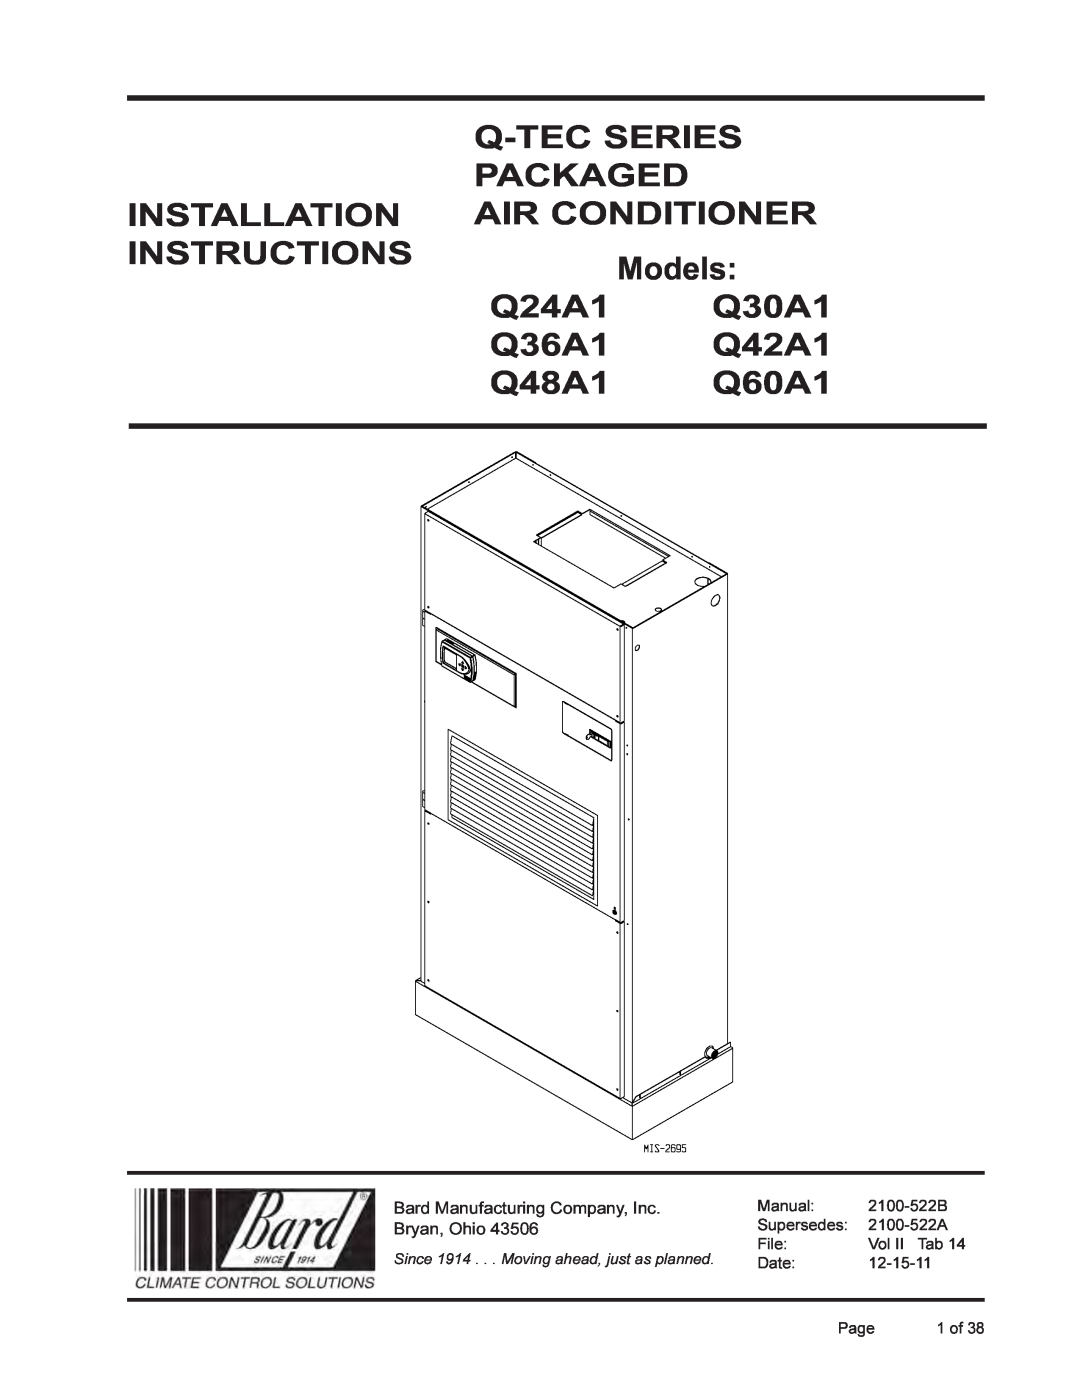 Bard Q36A1 installation instructions Q-Tecseries Packaged, Installation, Air Conditioner, Instructions, Models, Q24A1 